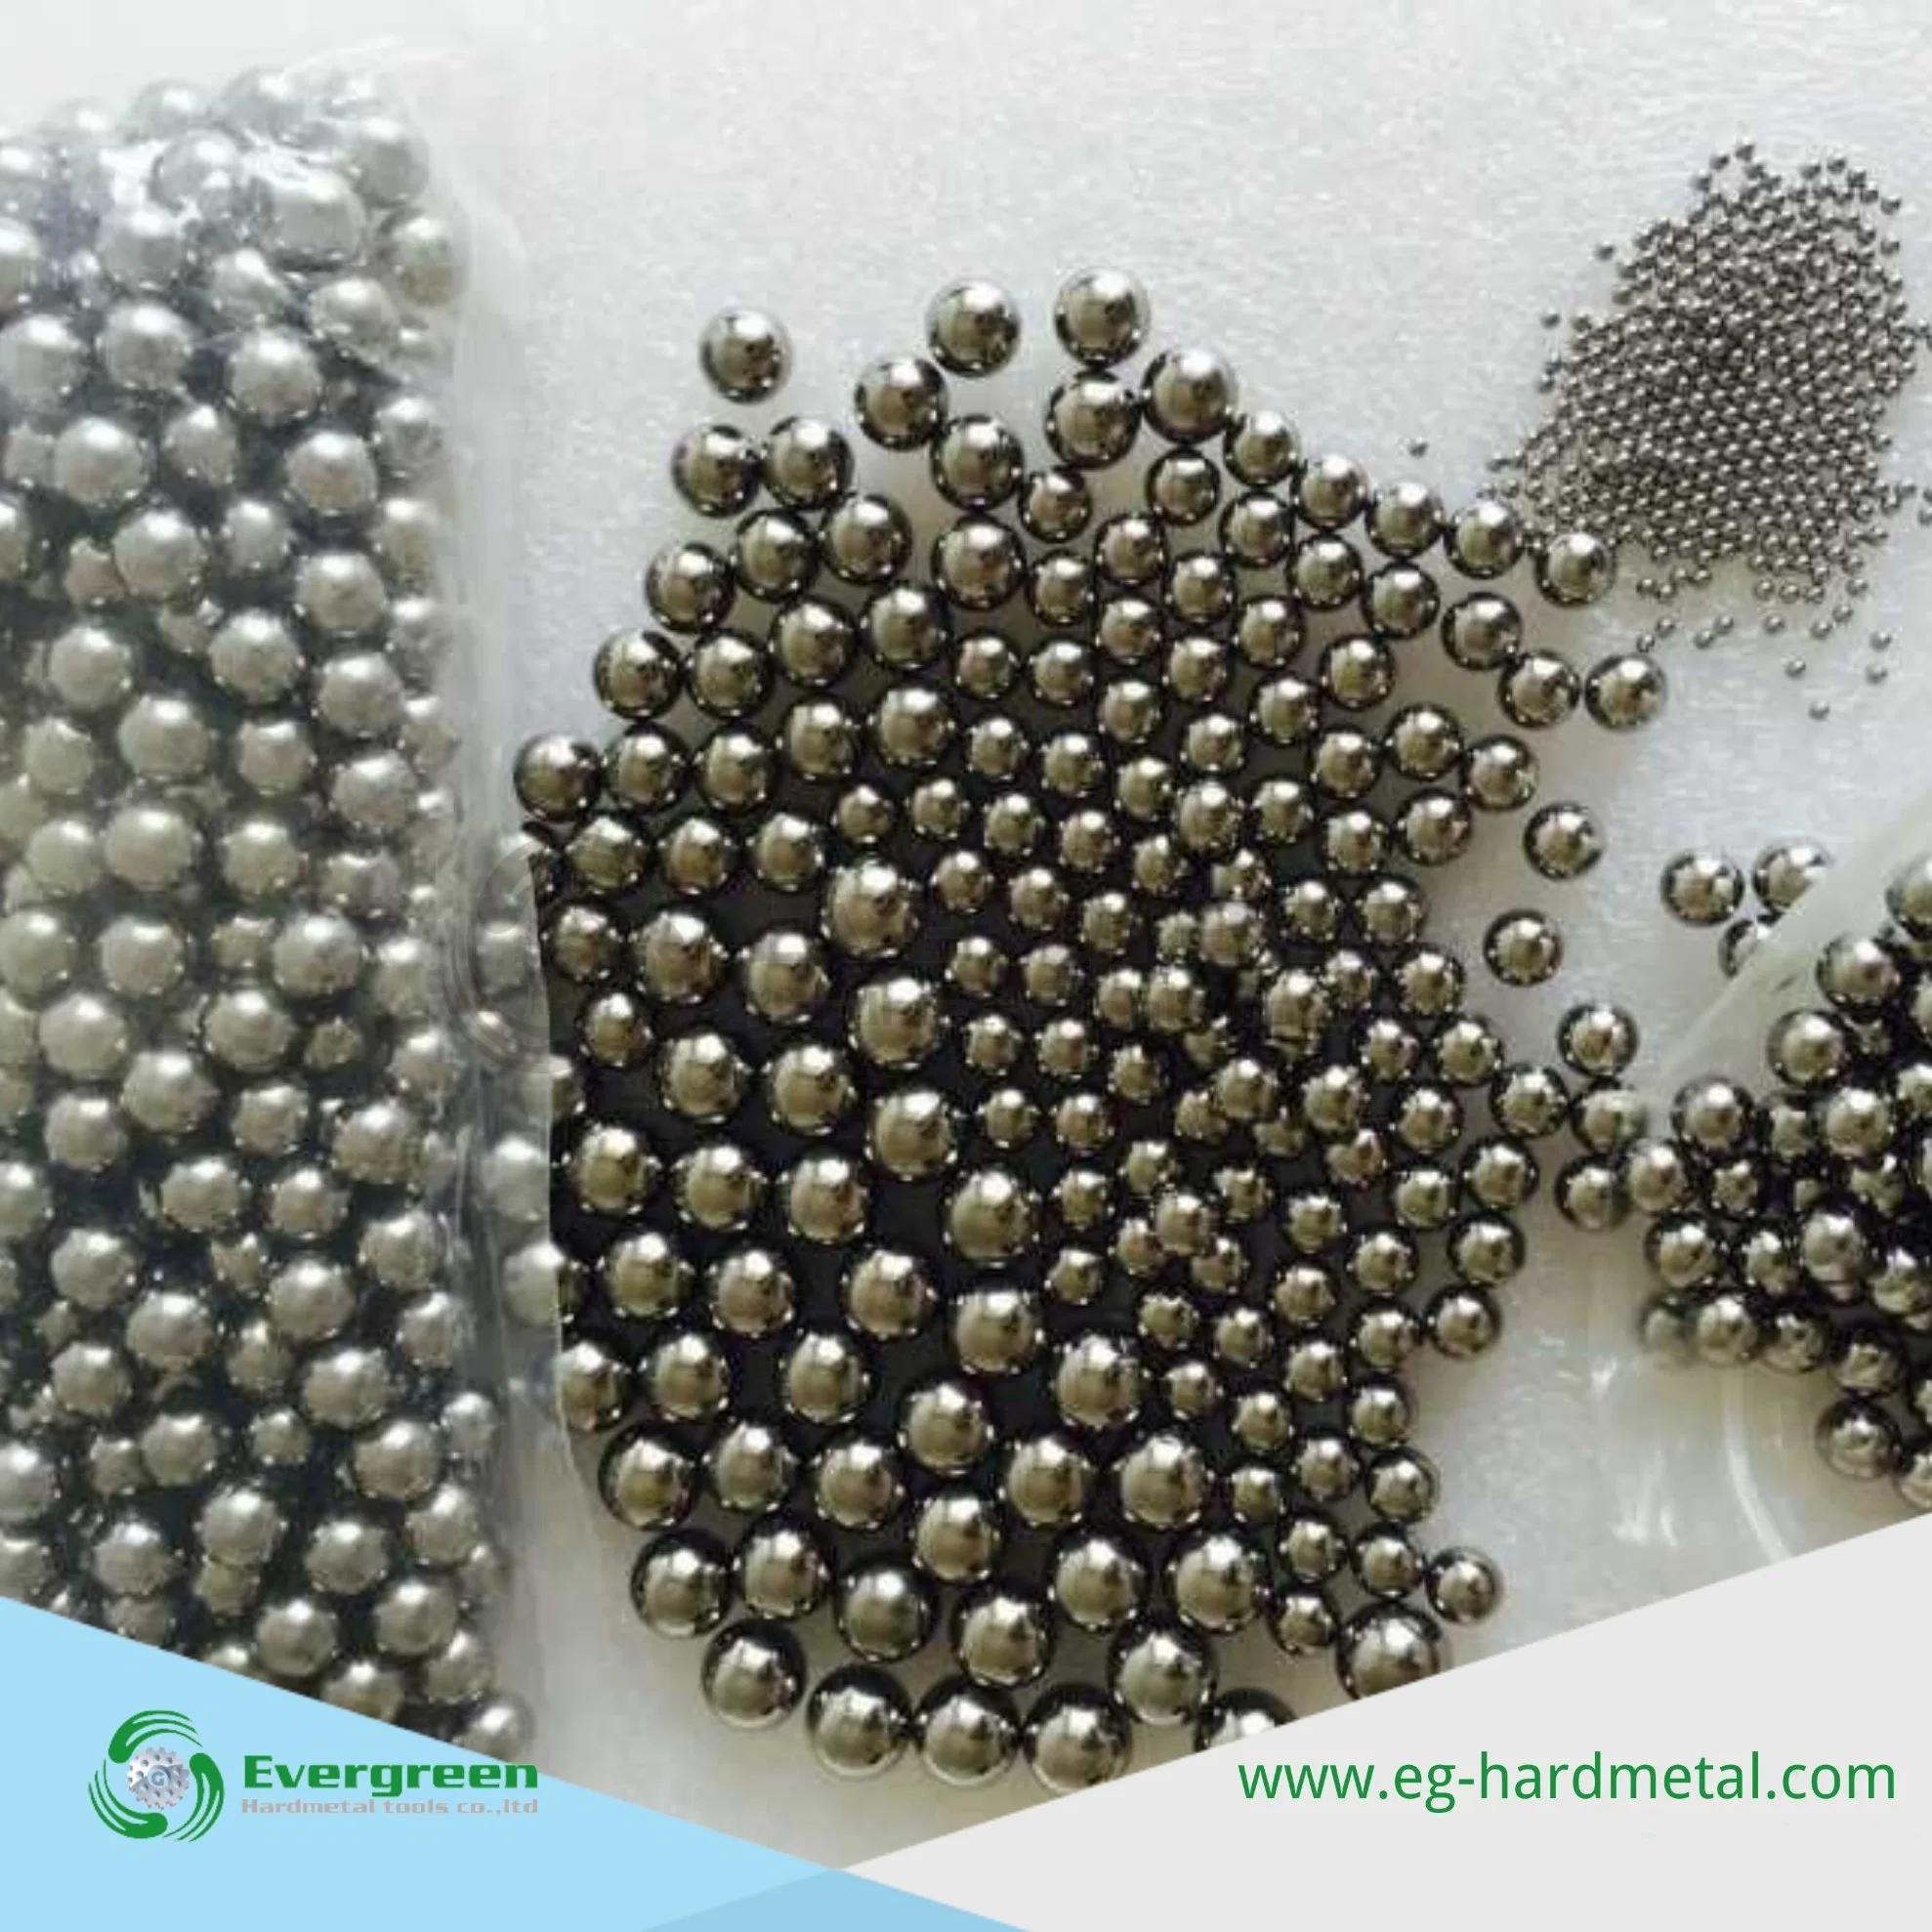 100% Raw Material Tungsten Carbide Ball Wear Resistant